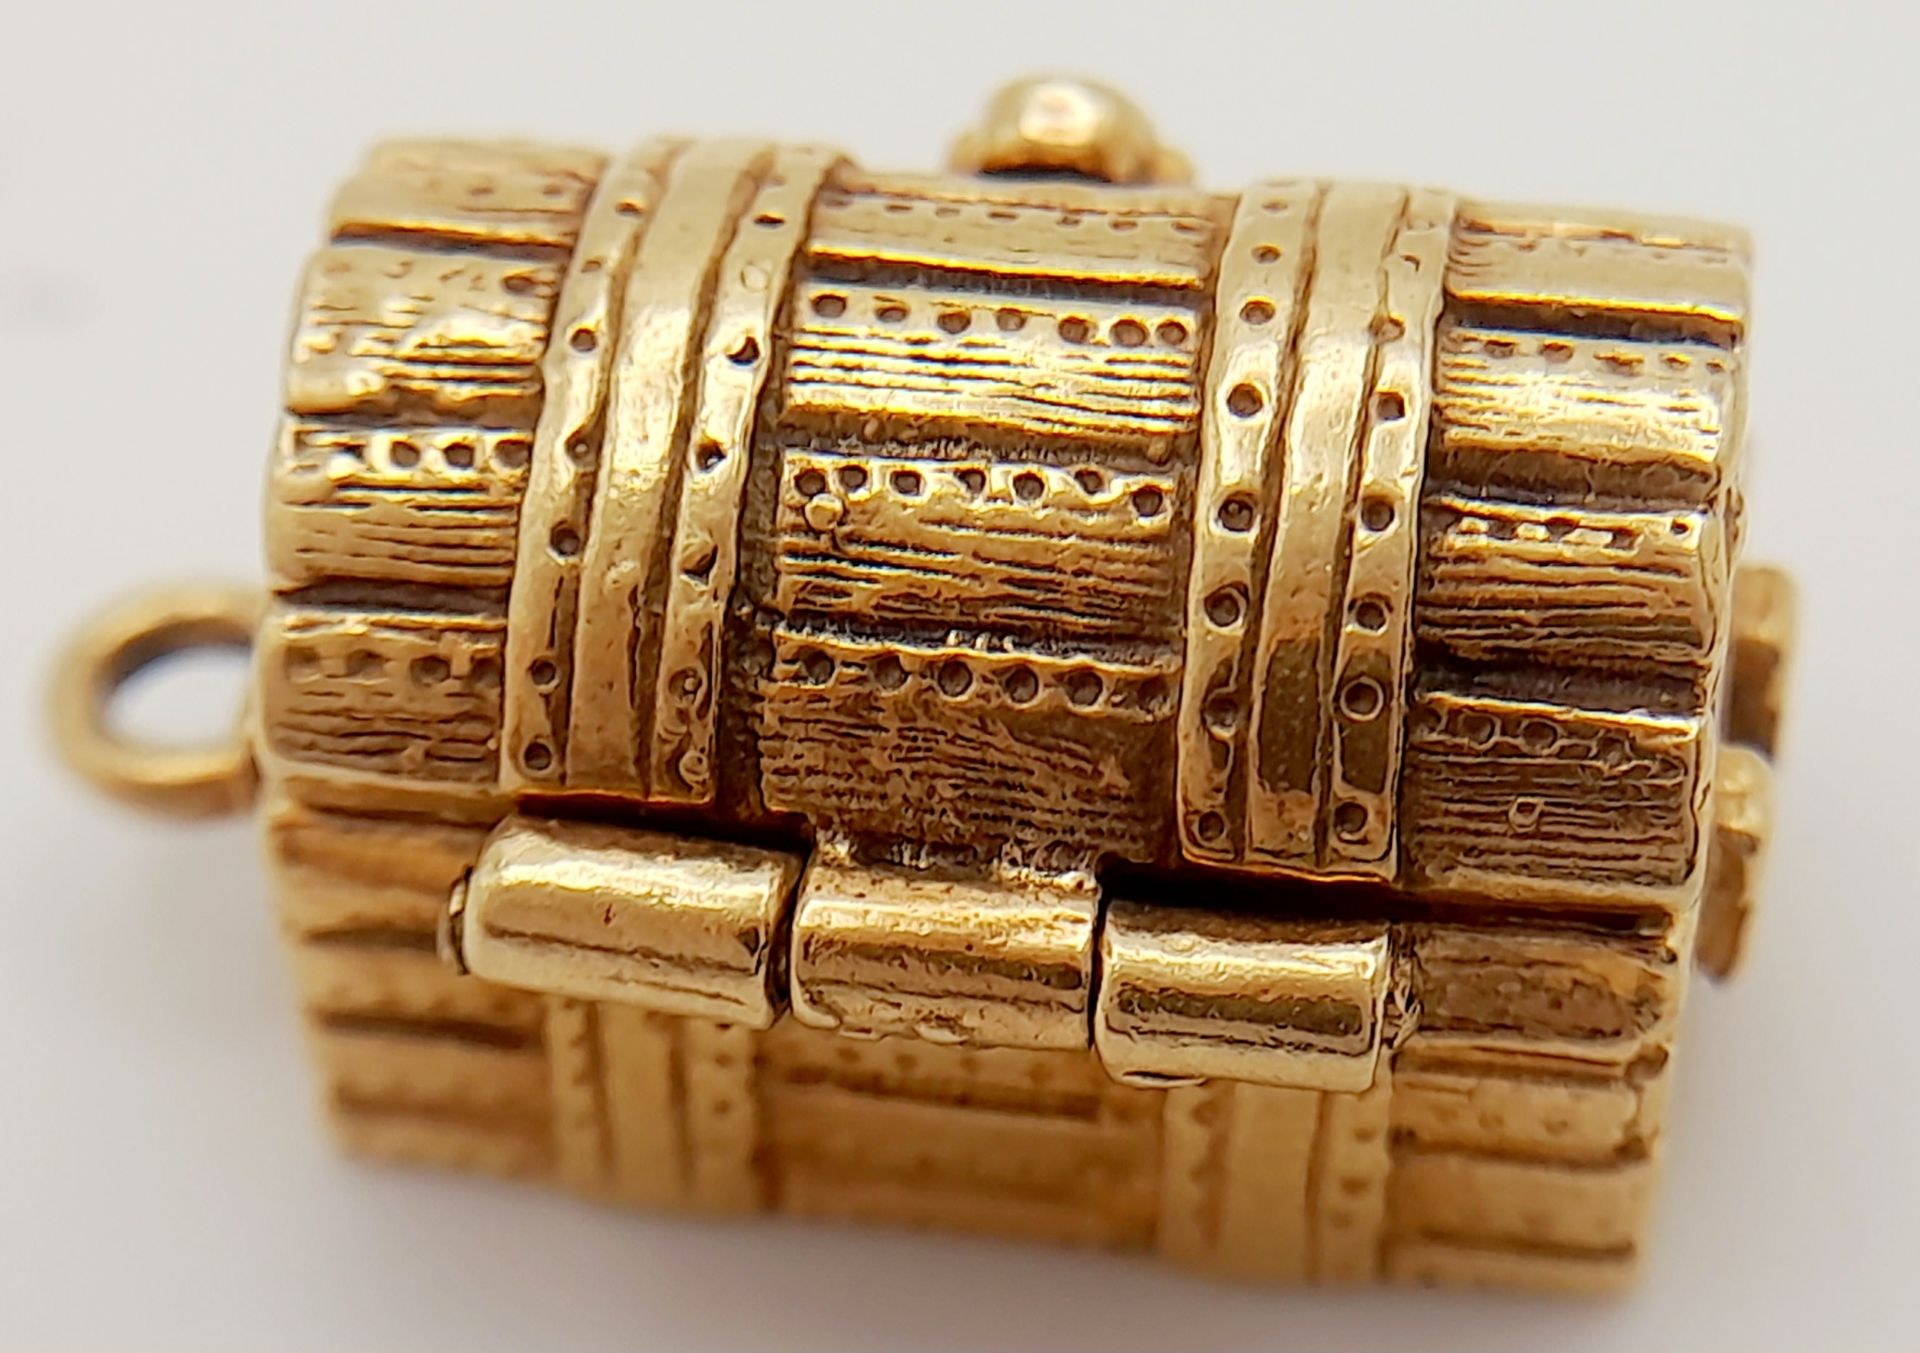 A 9K YELLOW GOLD TREASURE CHEST CHARM, WHICH OPENS TO REVEAL THE TREASURE INSIDE. 2cm length, 6.5g - Image 3 of 5